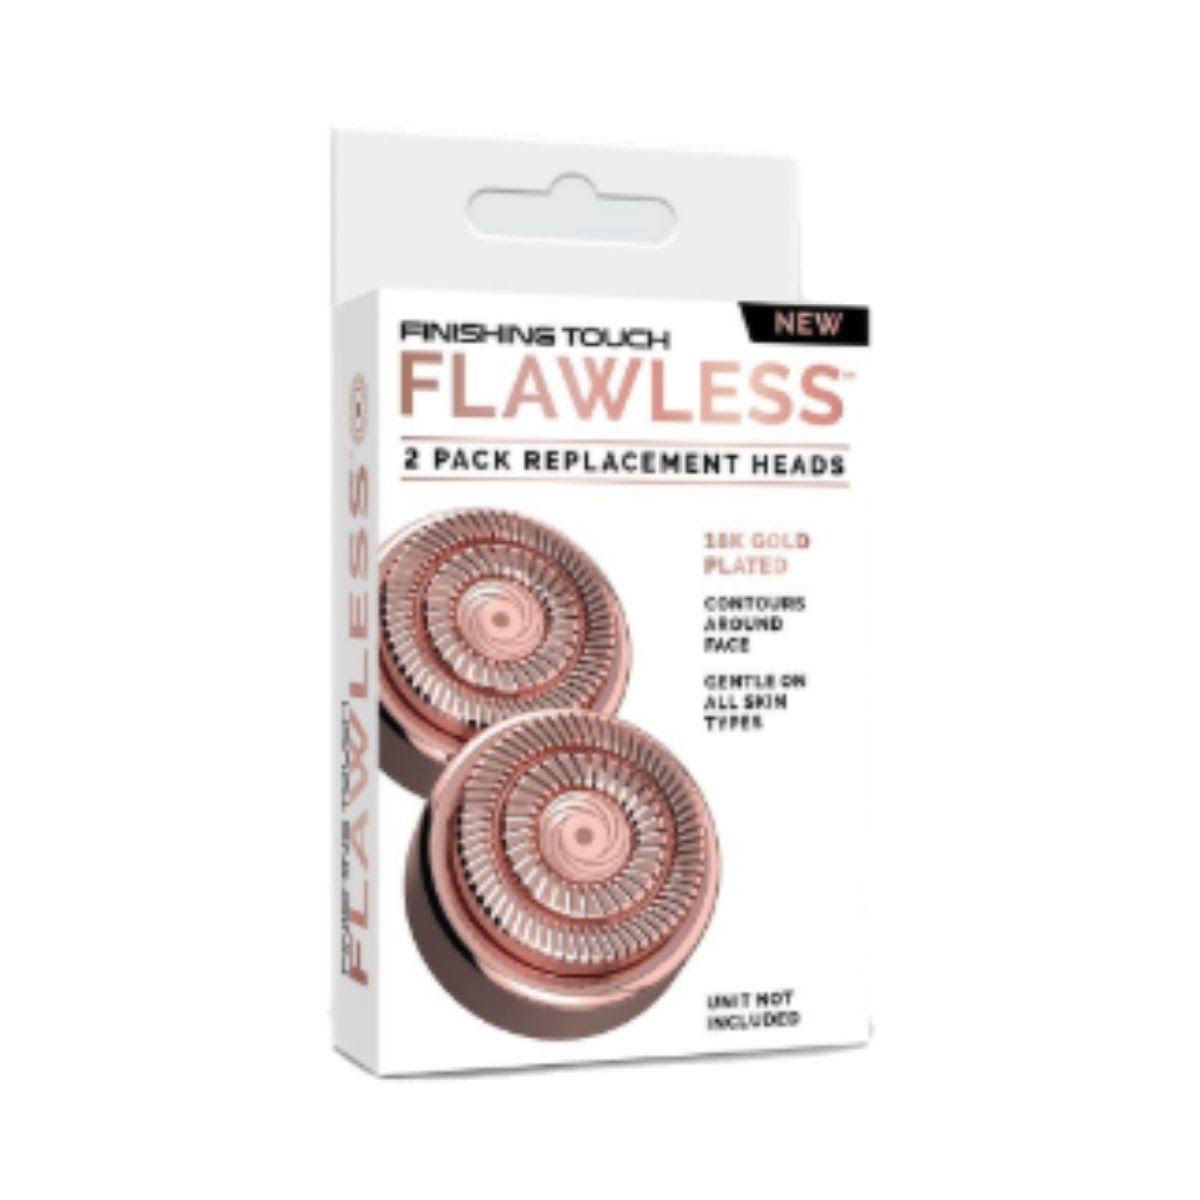 Flawless - Face Replacement Head 3.0 Hair Removal